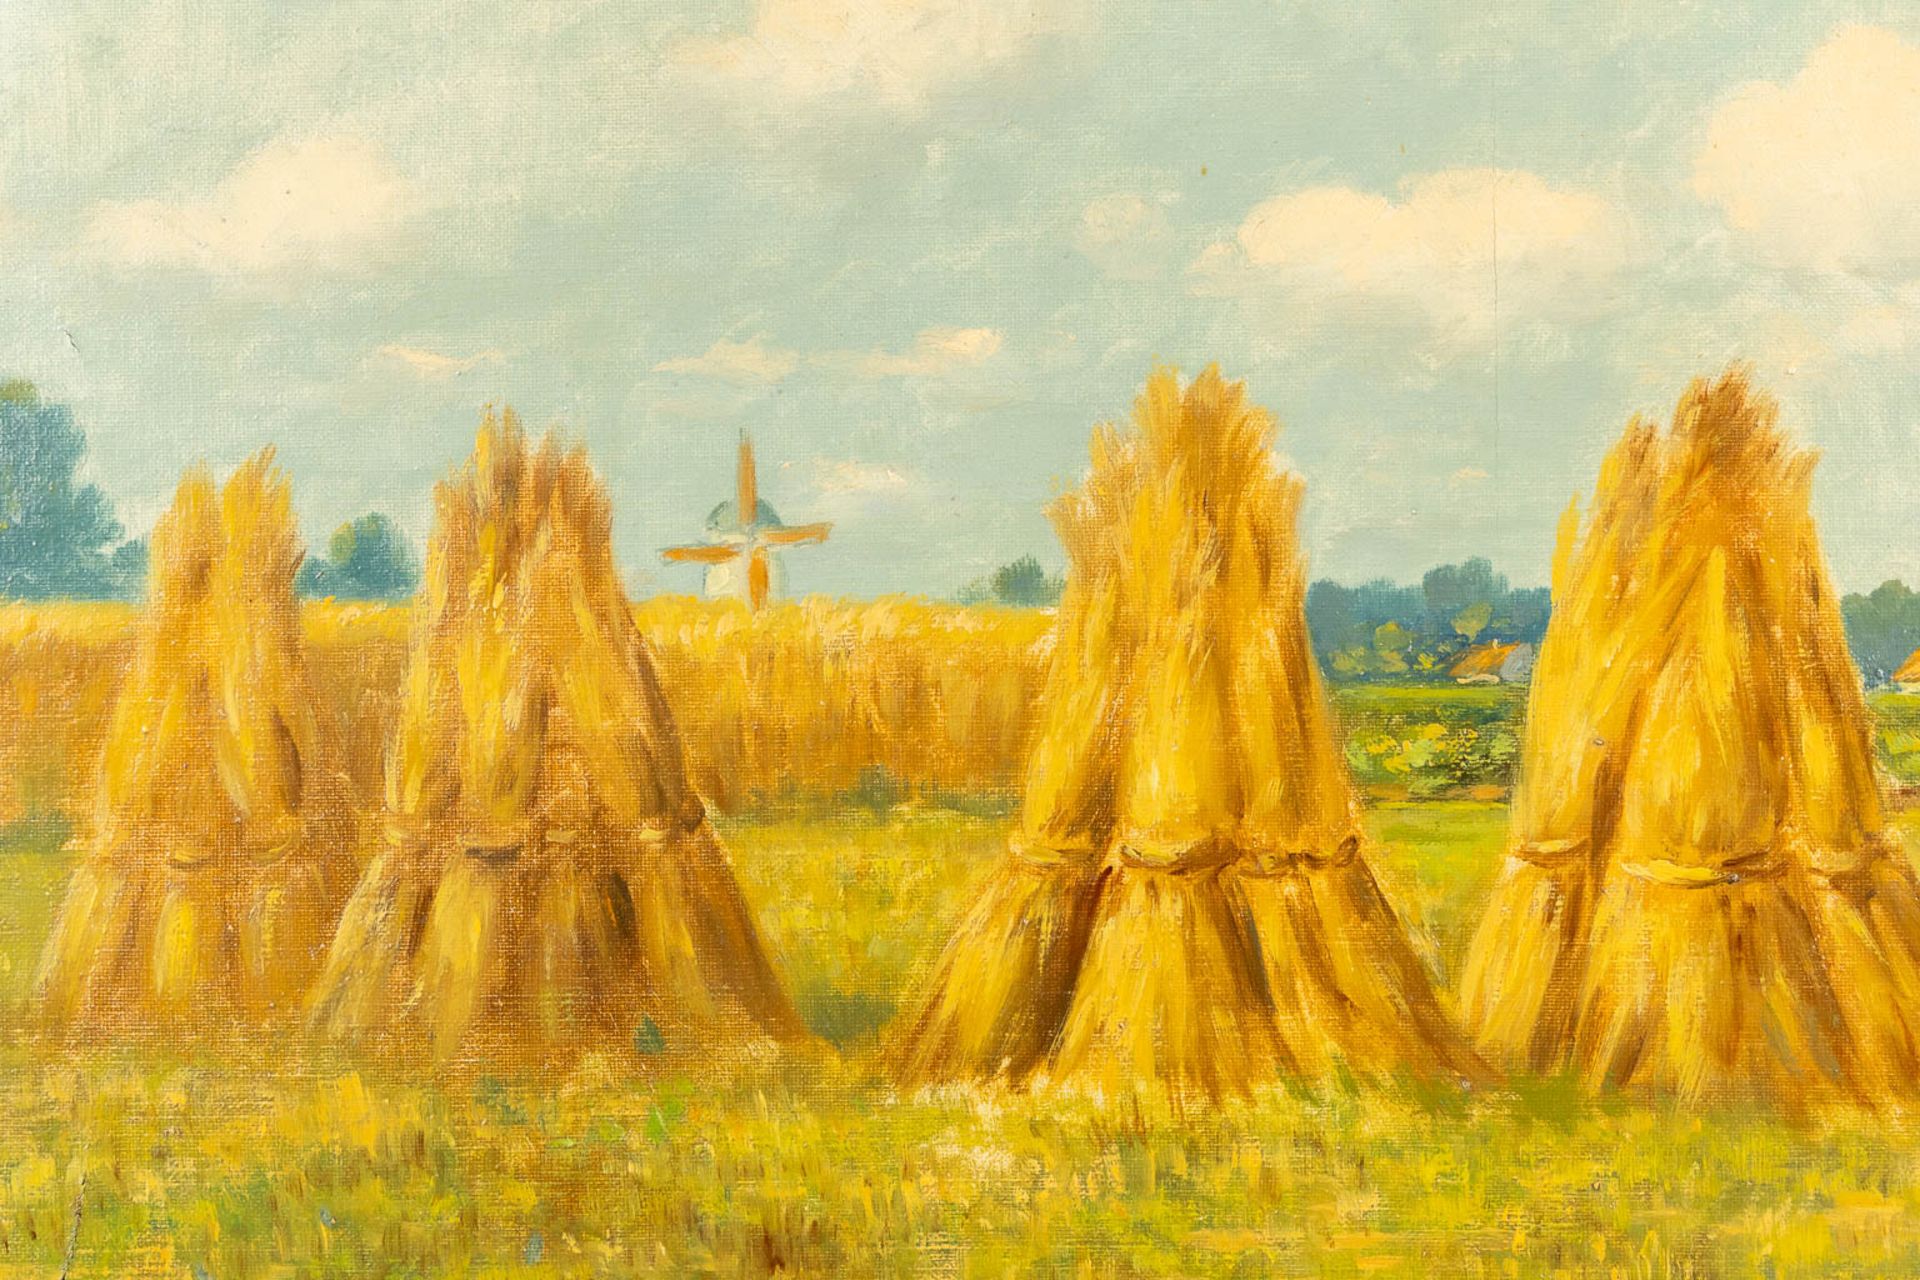 Paul SCHOUTEN (1860-1922) 'Haystacks and a Forest View' two paintings, oil on canvas. (W:100 x H:70 - Image 5 of 16